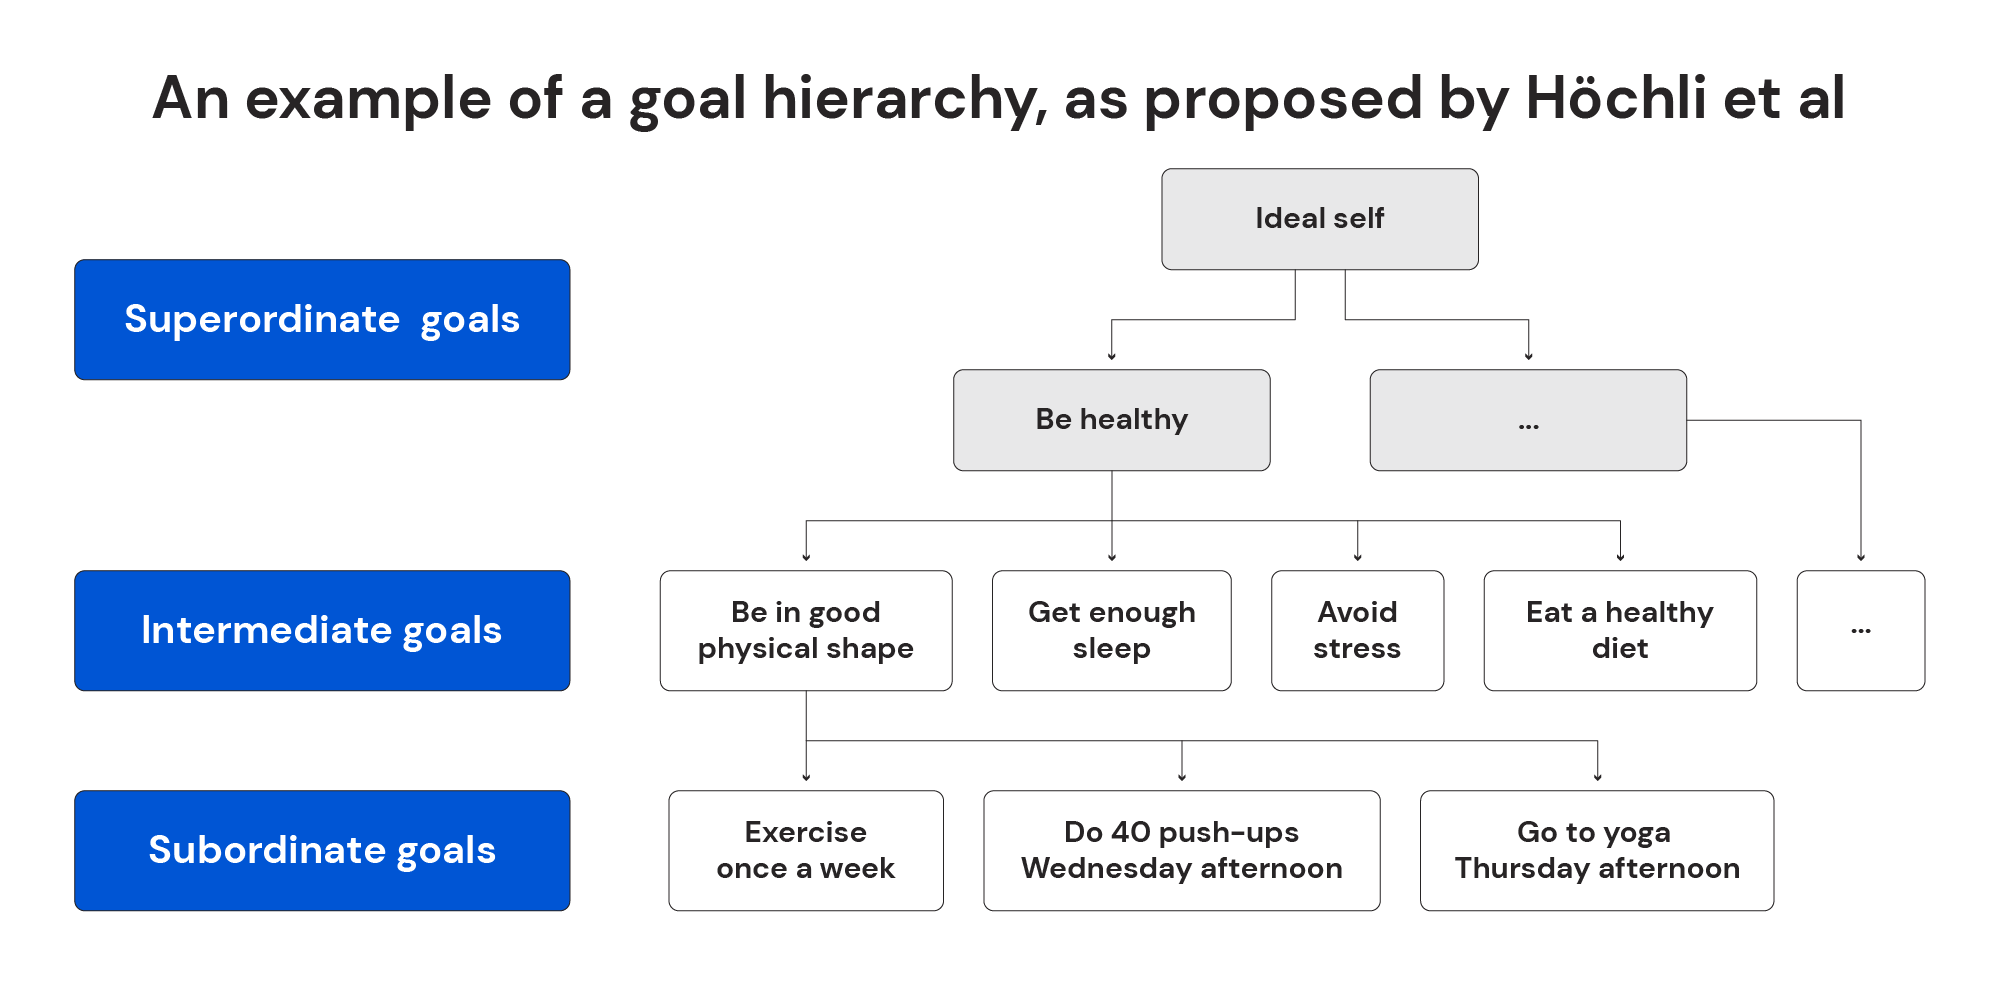 An example of a goal hierarchy